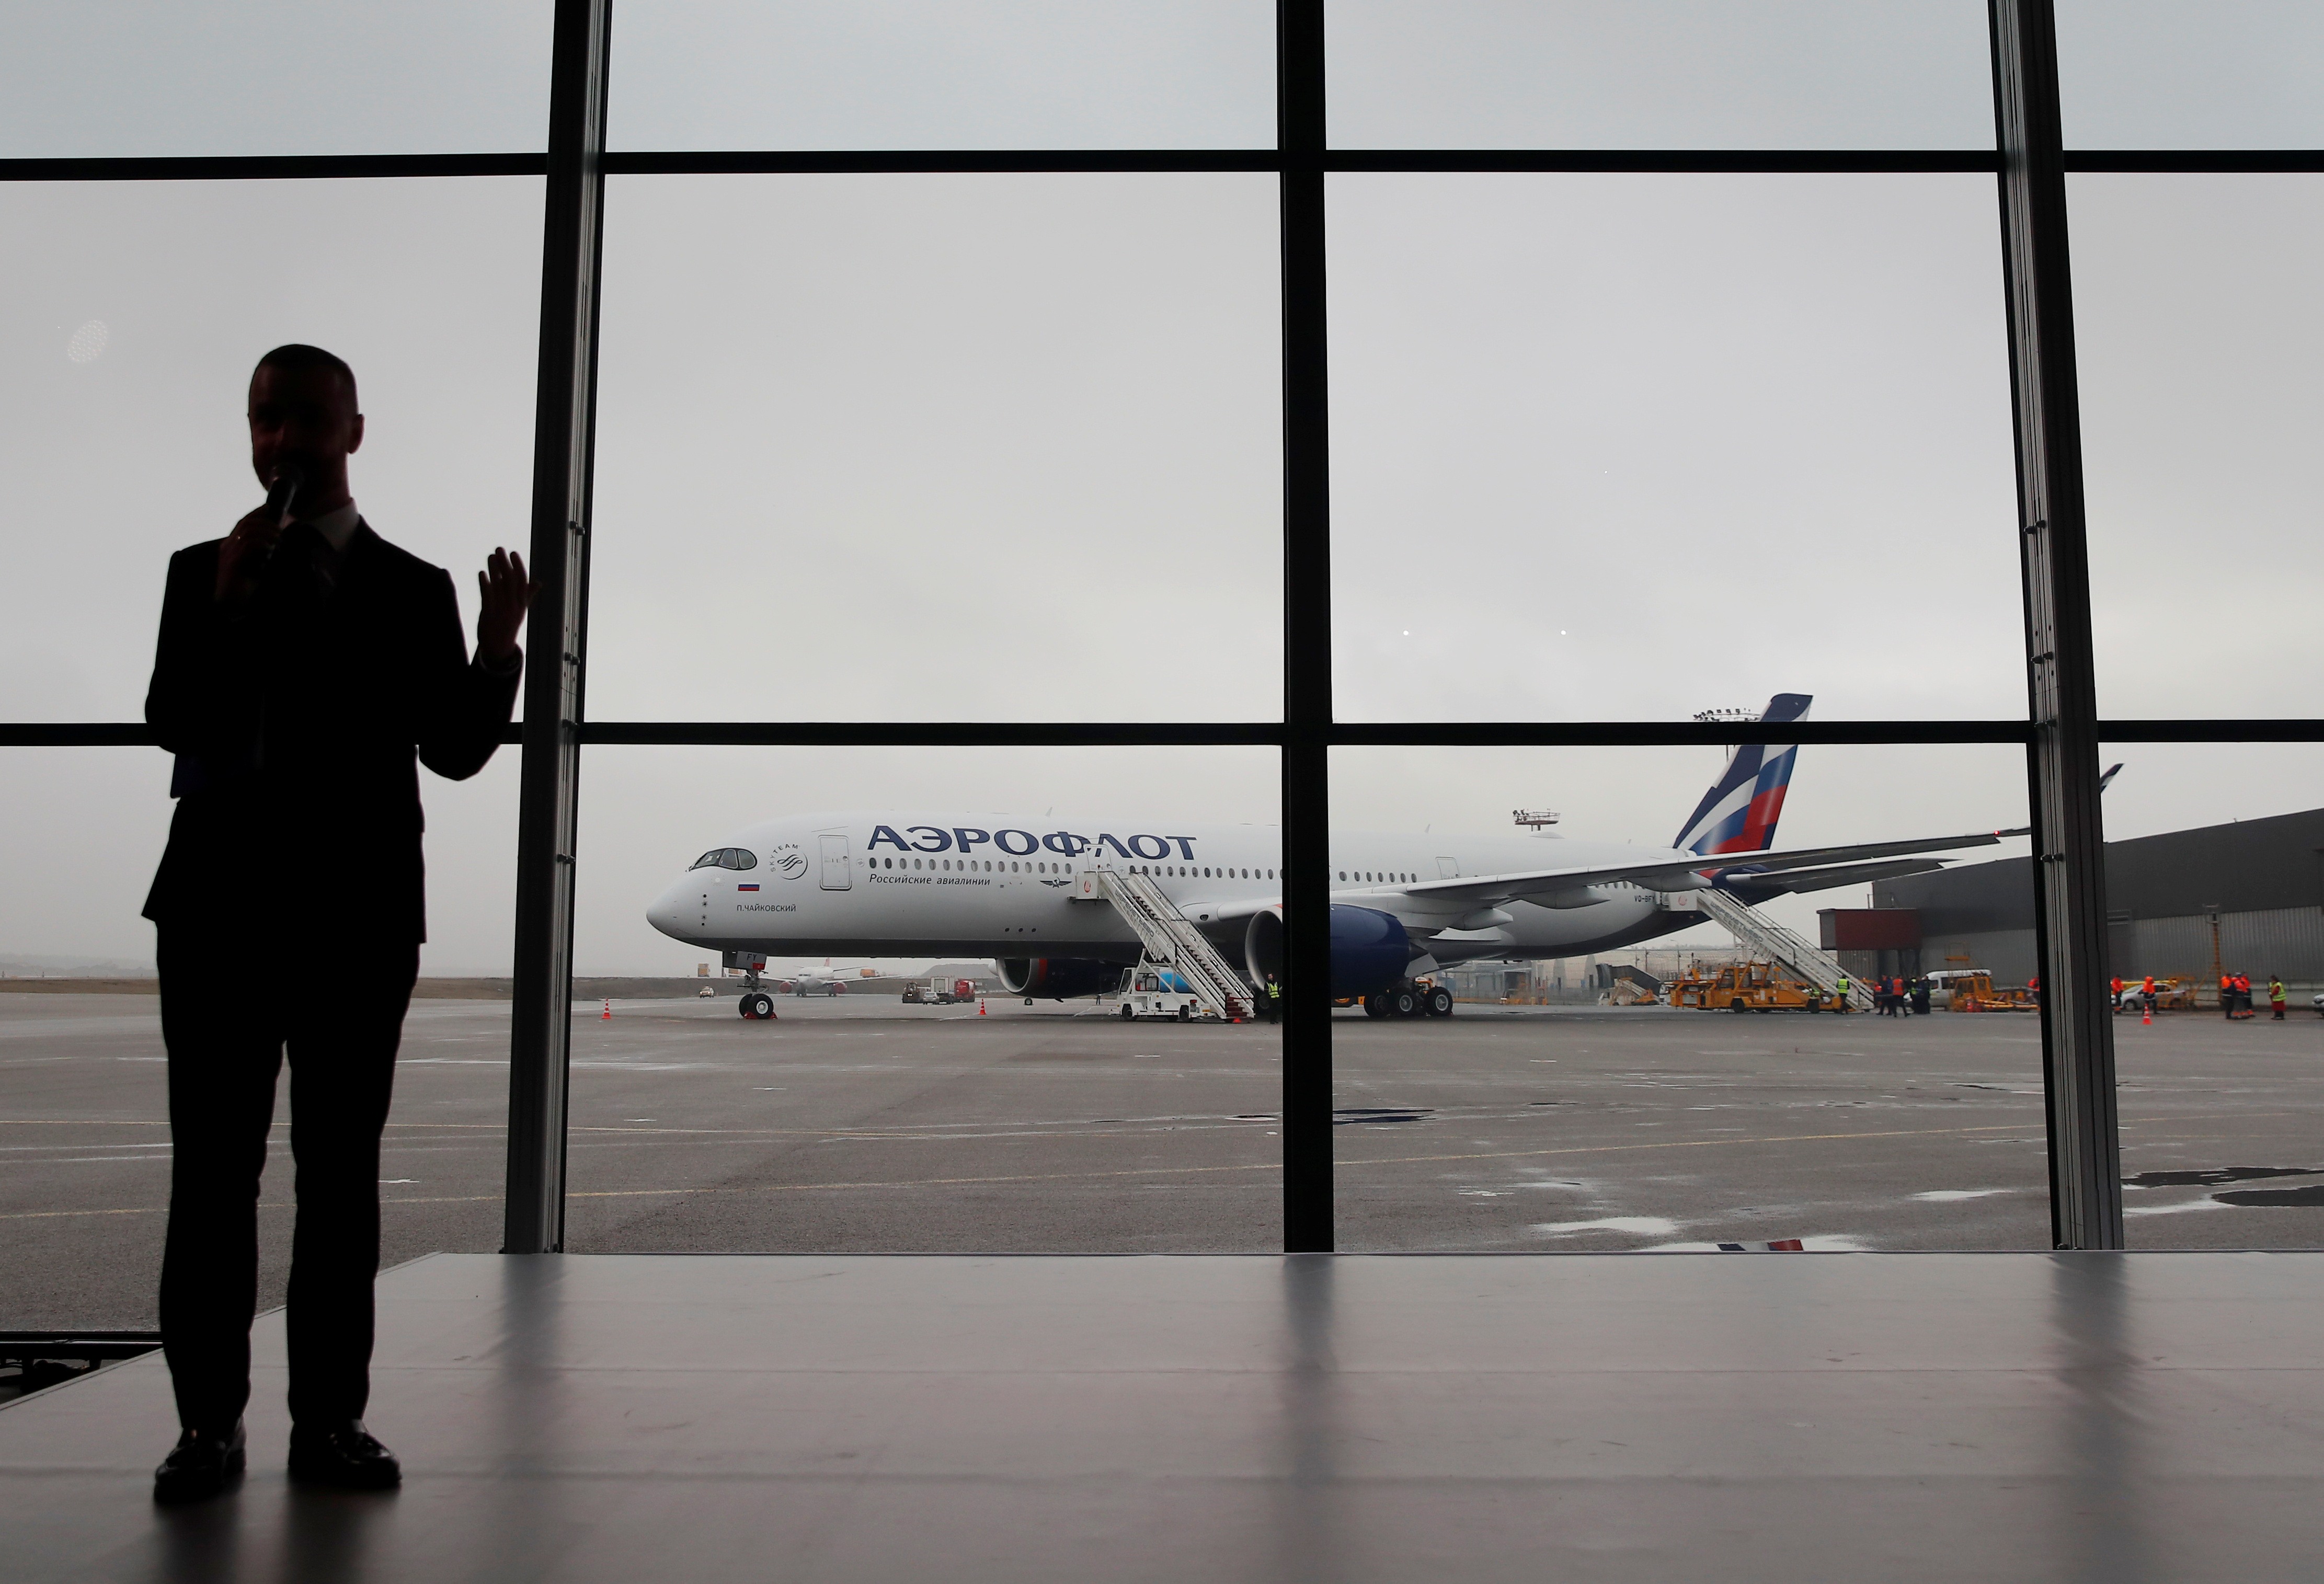 Aeroflot presents its first Airbus A350-900 at Sheremetyevo International Airport outside Moscow